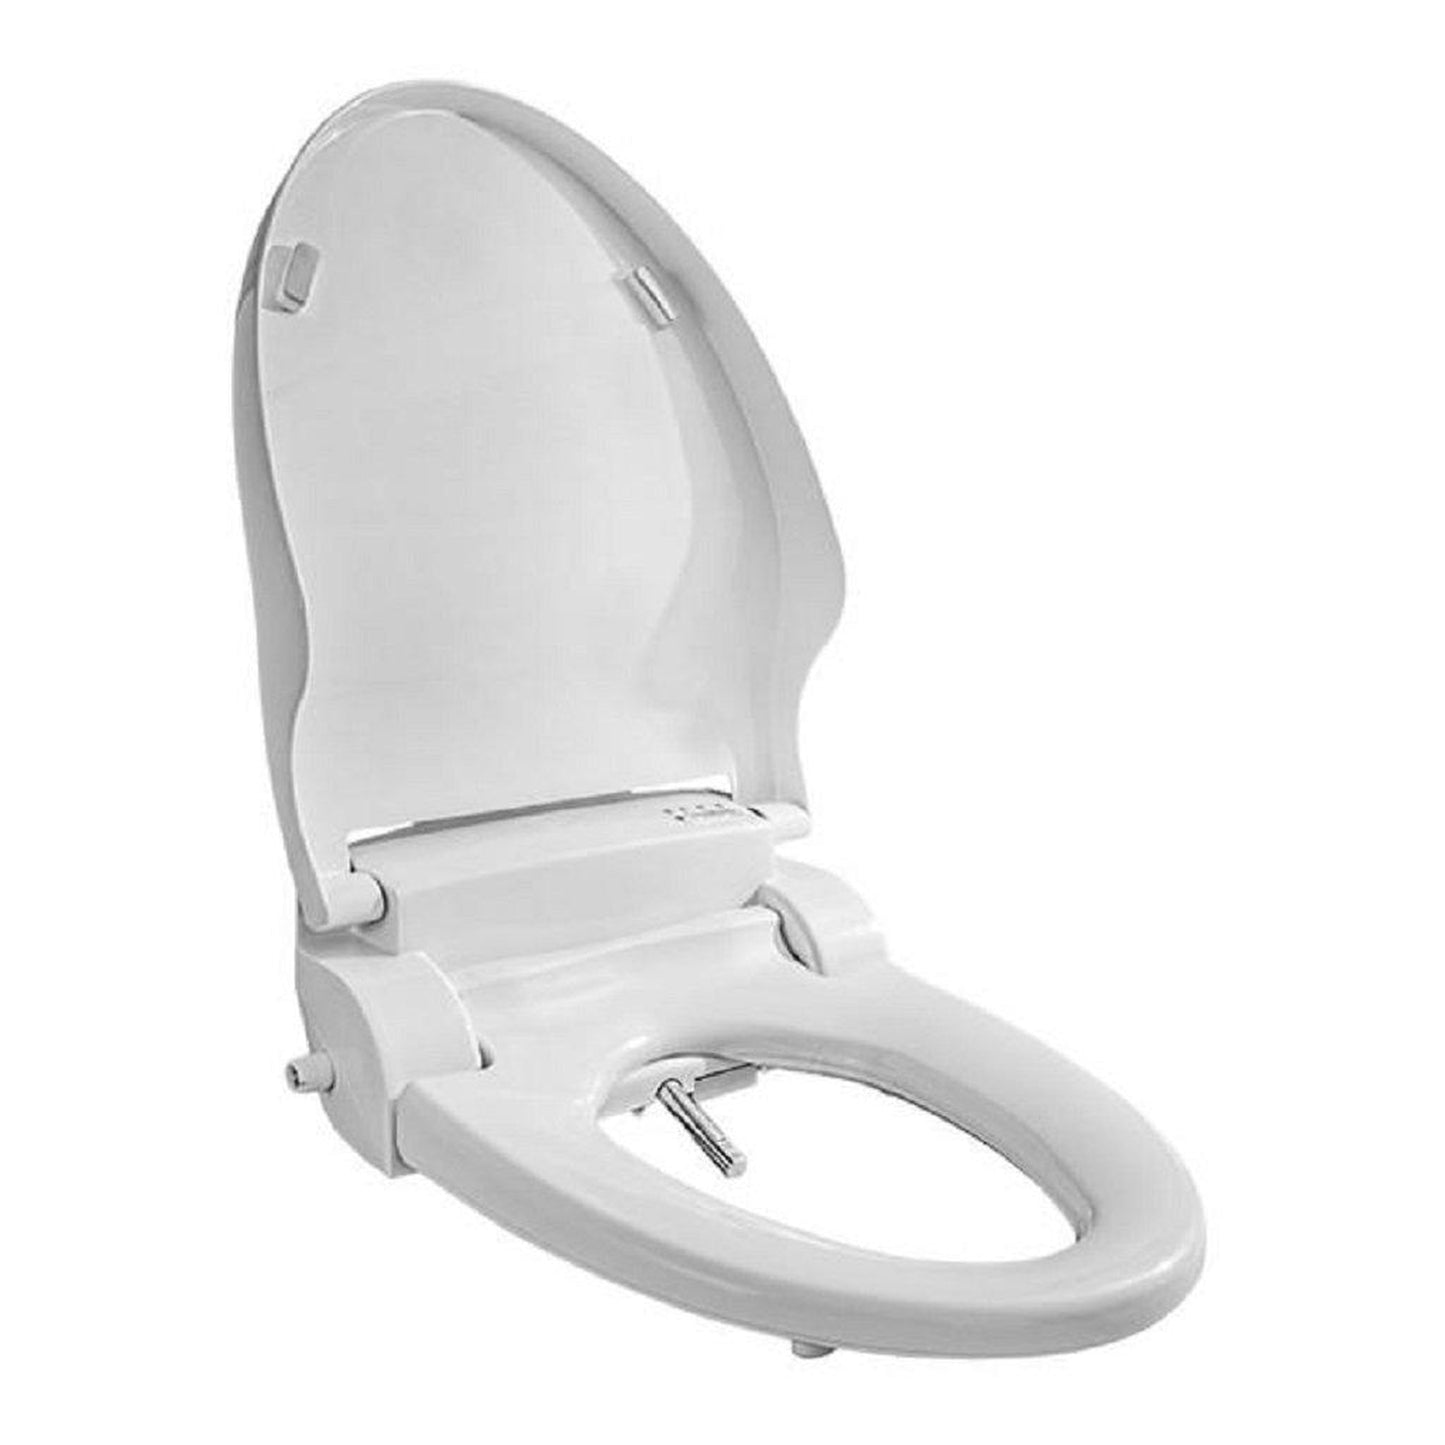 Dignity Solutions Cascade 3000 21" Elongated White Electric Bidet Toilet Seat With Small Remote Control